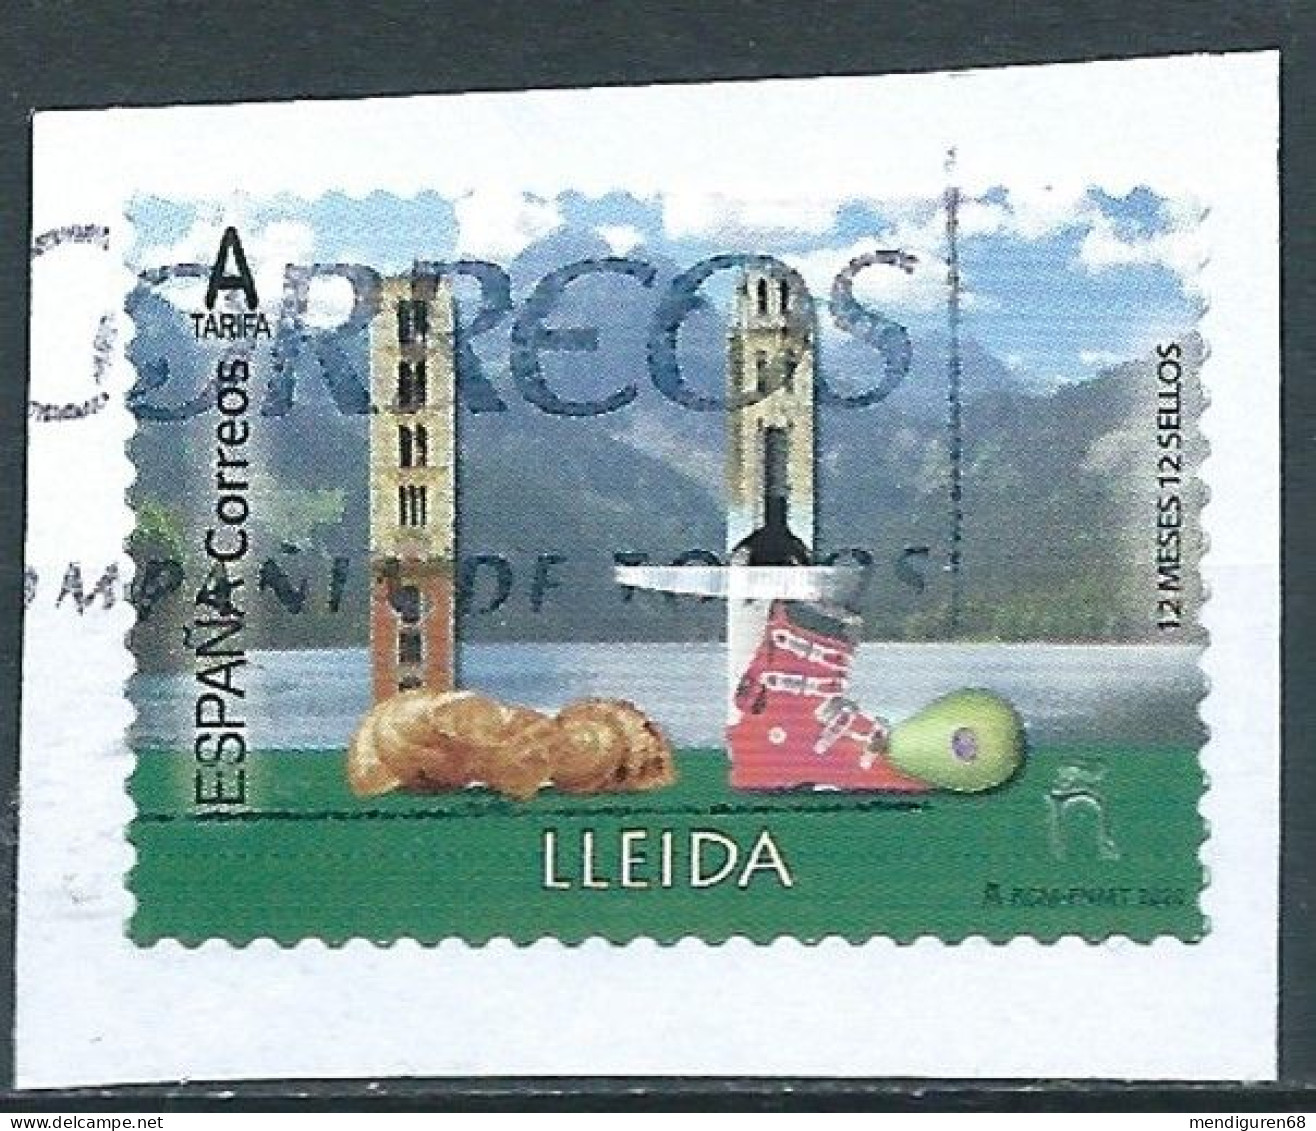 ESPAGNE SPANIEN SPAIN ESPAÑA 2020 12 MONTHS MESES 12 STAMPS SELLOS: LLEIDA USED ED 5368 MI 5468 YT 5172 SC 4406 SG 5420 - Used Stamps